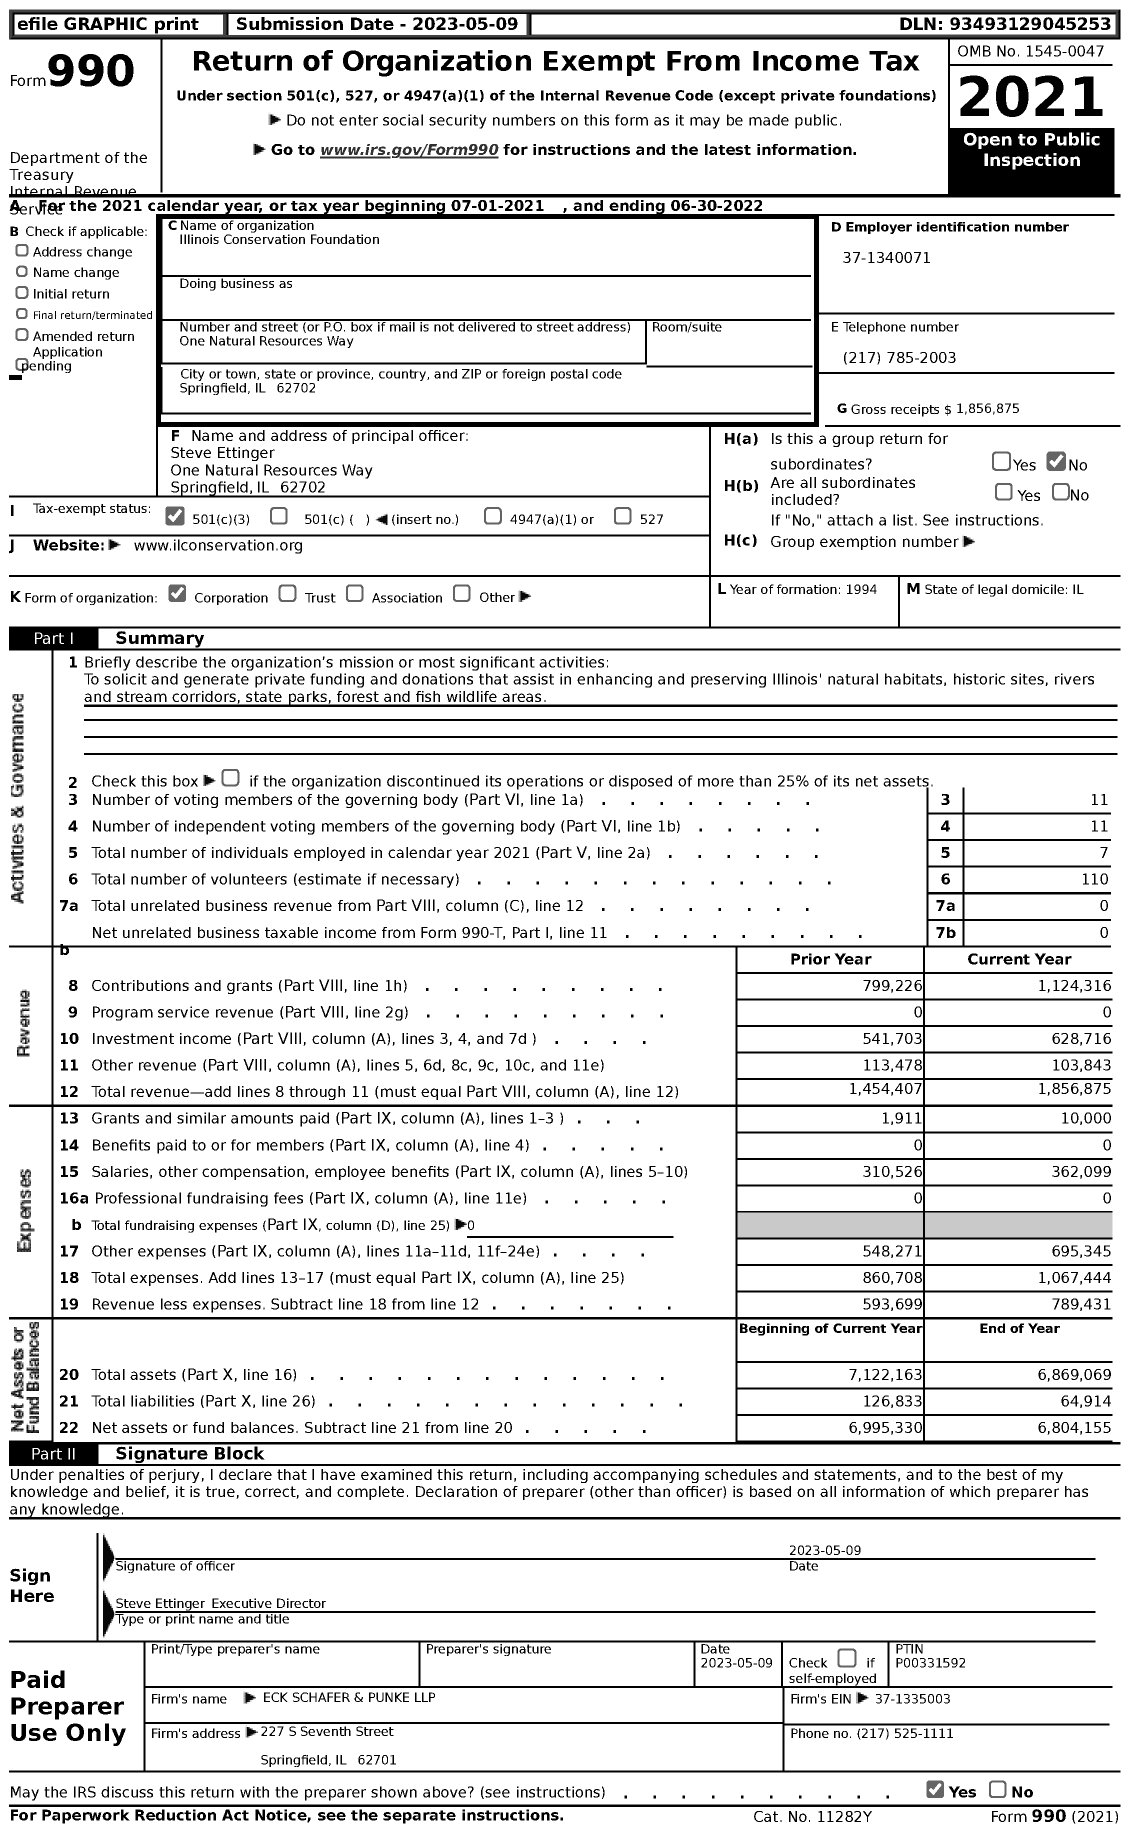 Image of first page of 2021 Form 990 for Illinois Conservation Foundation (ICF)